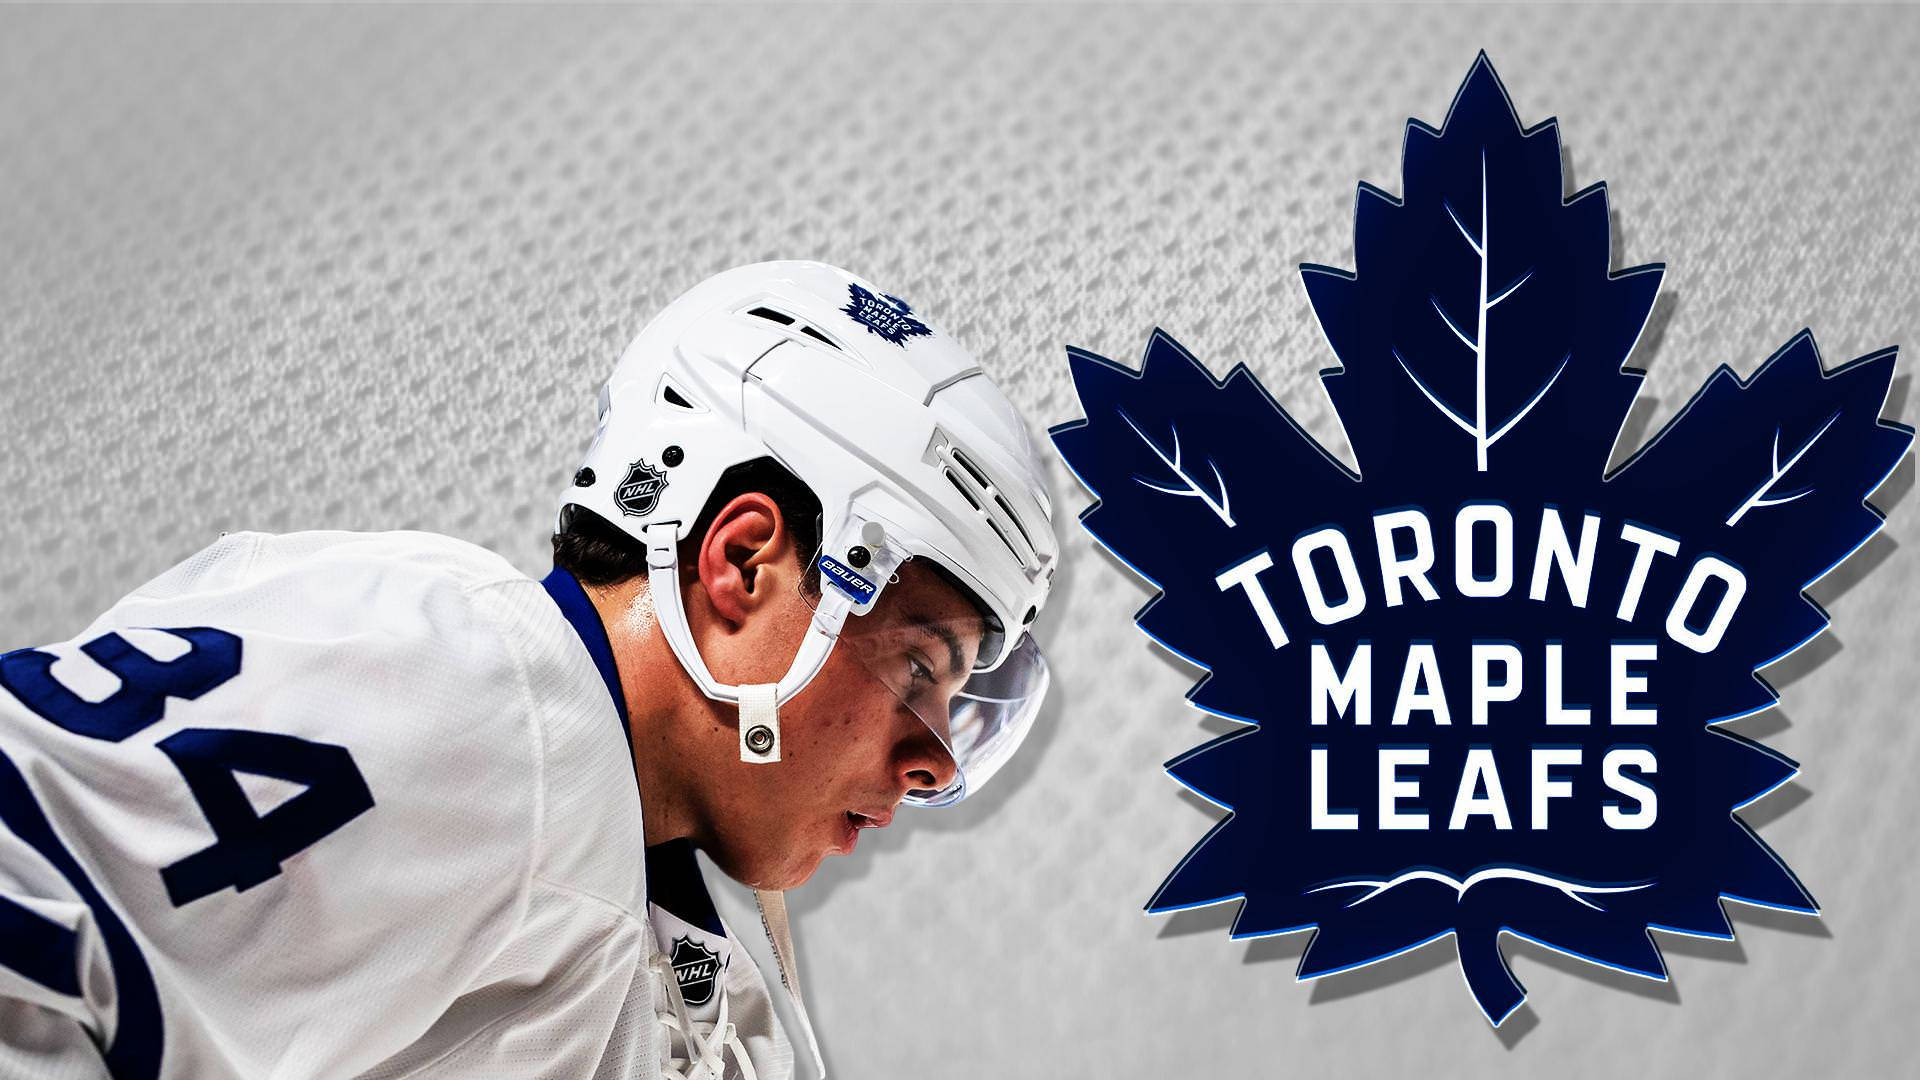 Toronto Maple Leafs Player And Logo Background